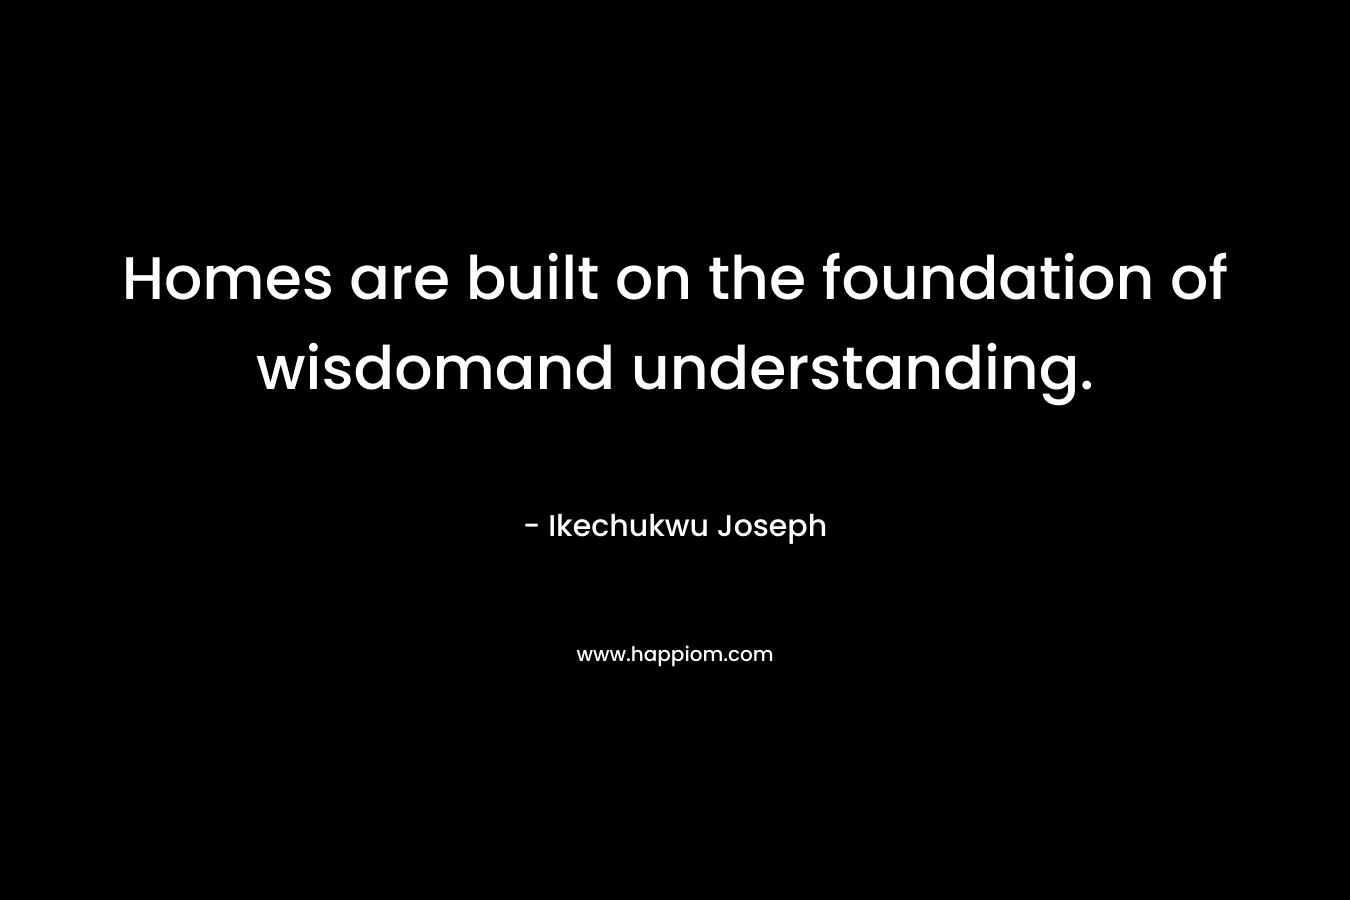 Homes are built on the foundation of wisdomand understanding. – Ikechukwu Joseph